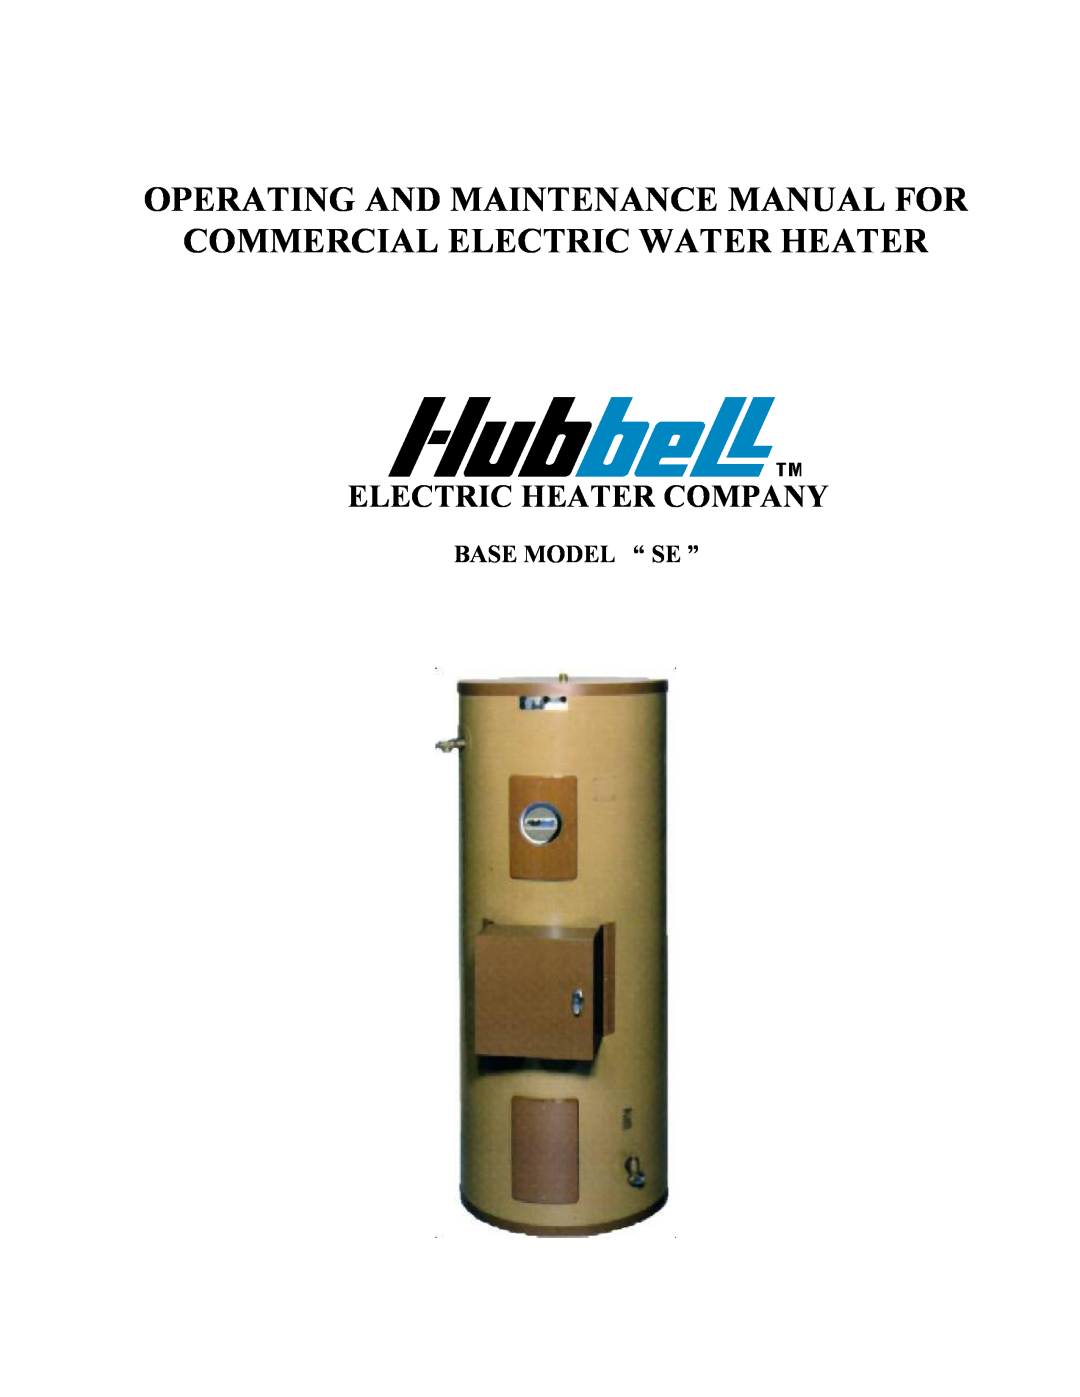 Hubbell Electric Heater Company SE manual Base Model “ Se ”, Operating And Maintenance Manual For, Electric Heater Company 